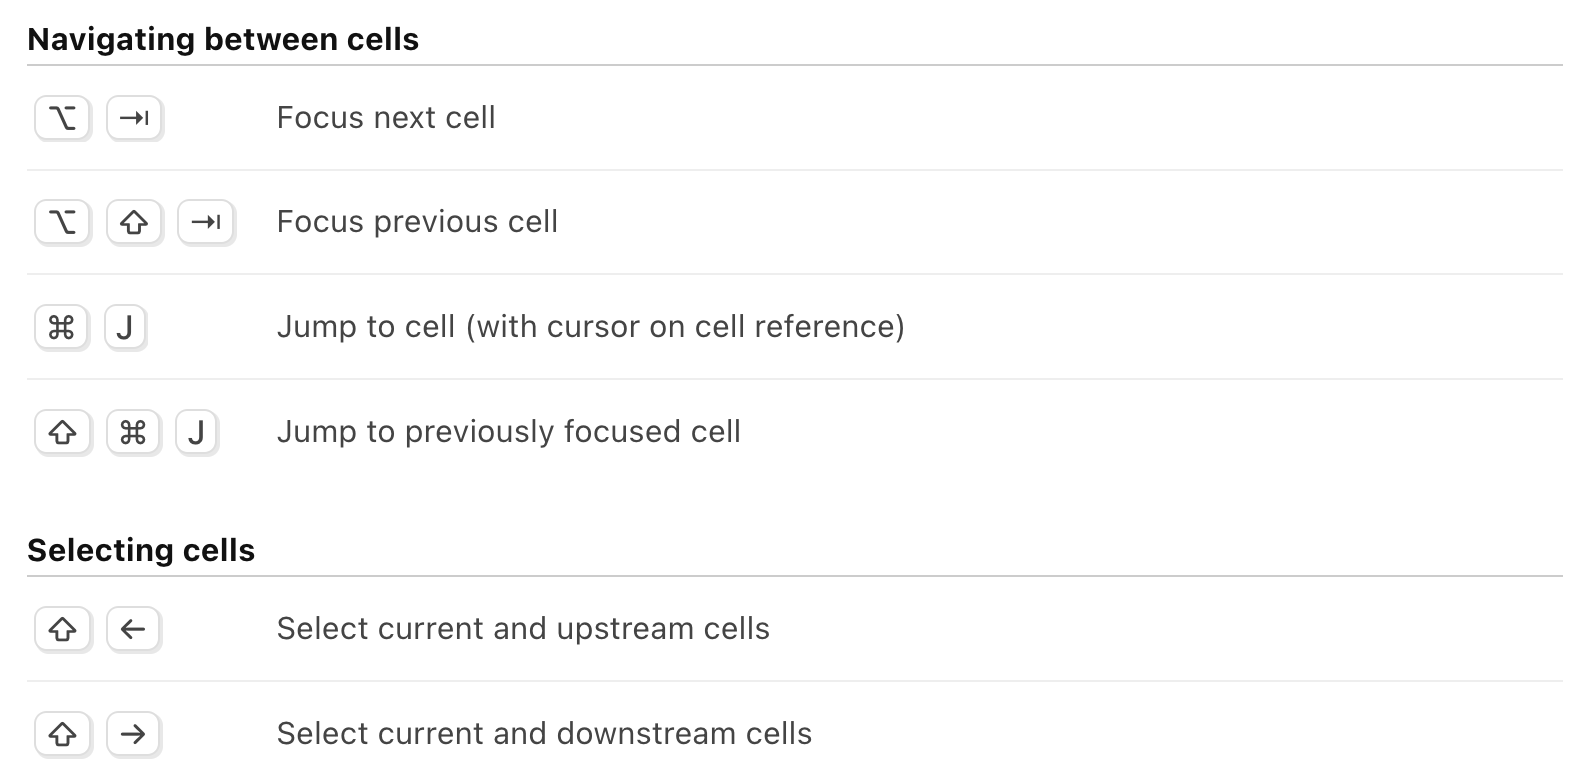 Useful shortcuts that work in the Minimap to move or select cells. The shortcuts are the same as those listed in our Keyboard Shortcuts documentation.